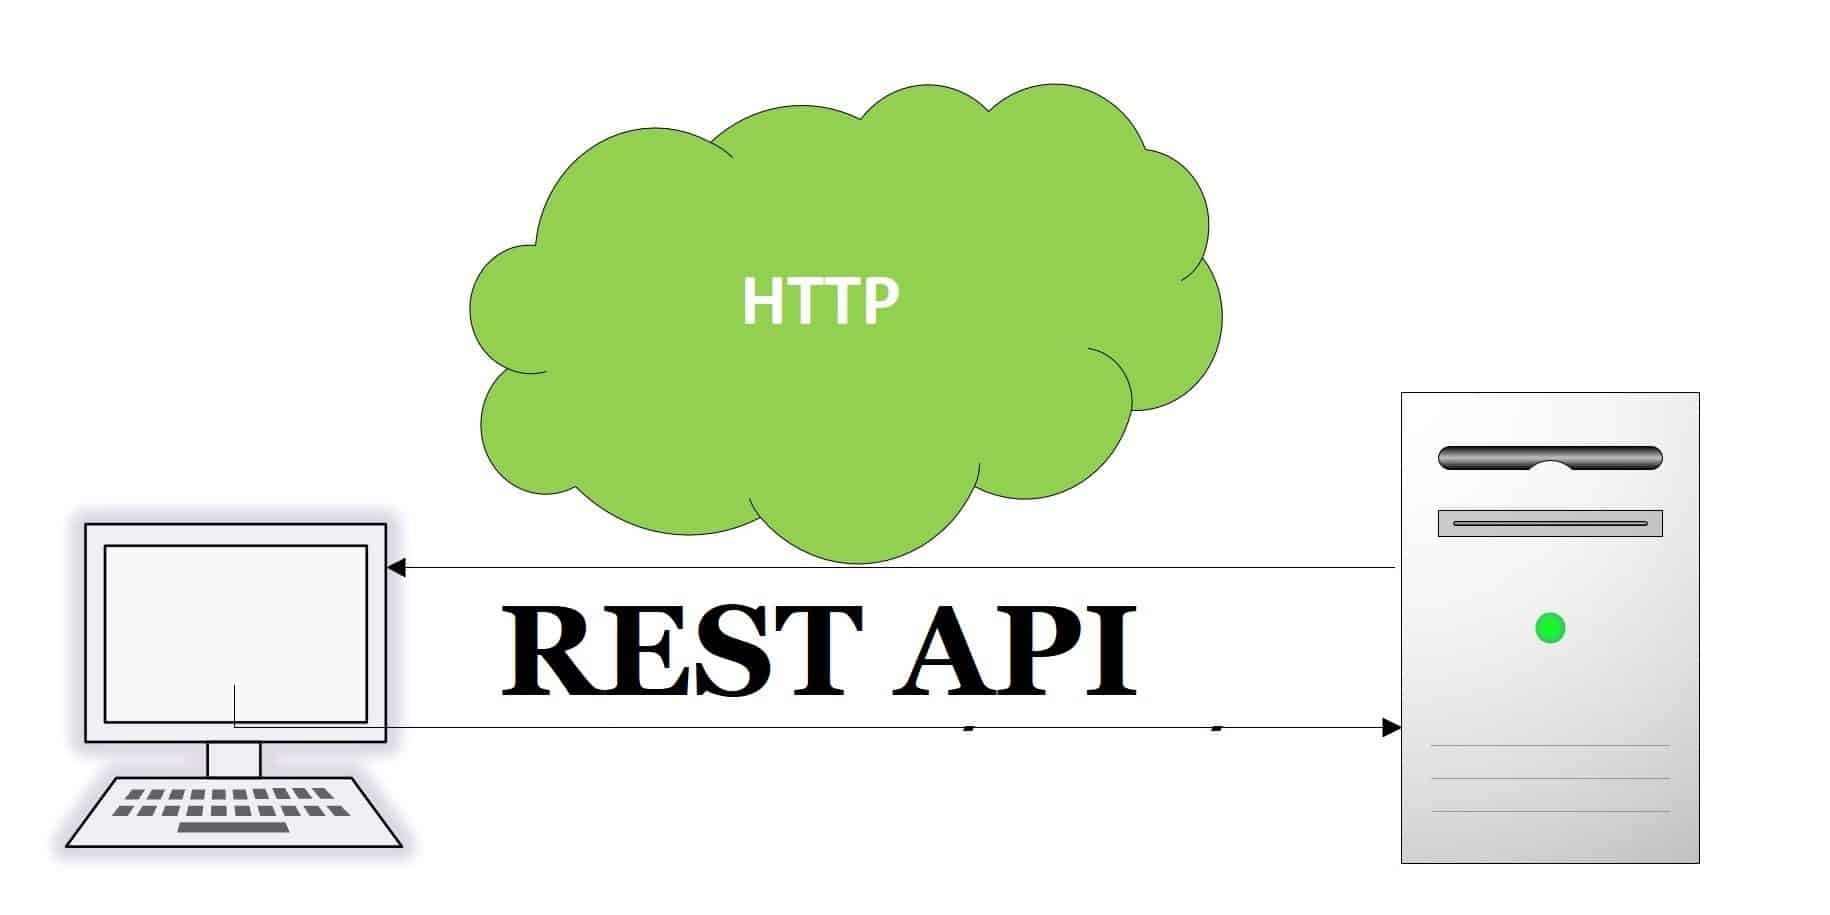 RESTFul HTTP GET with Request Body Example in ASPNET Core REST API URL Naming Conventions and Best Practices